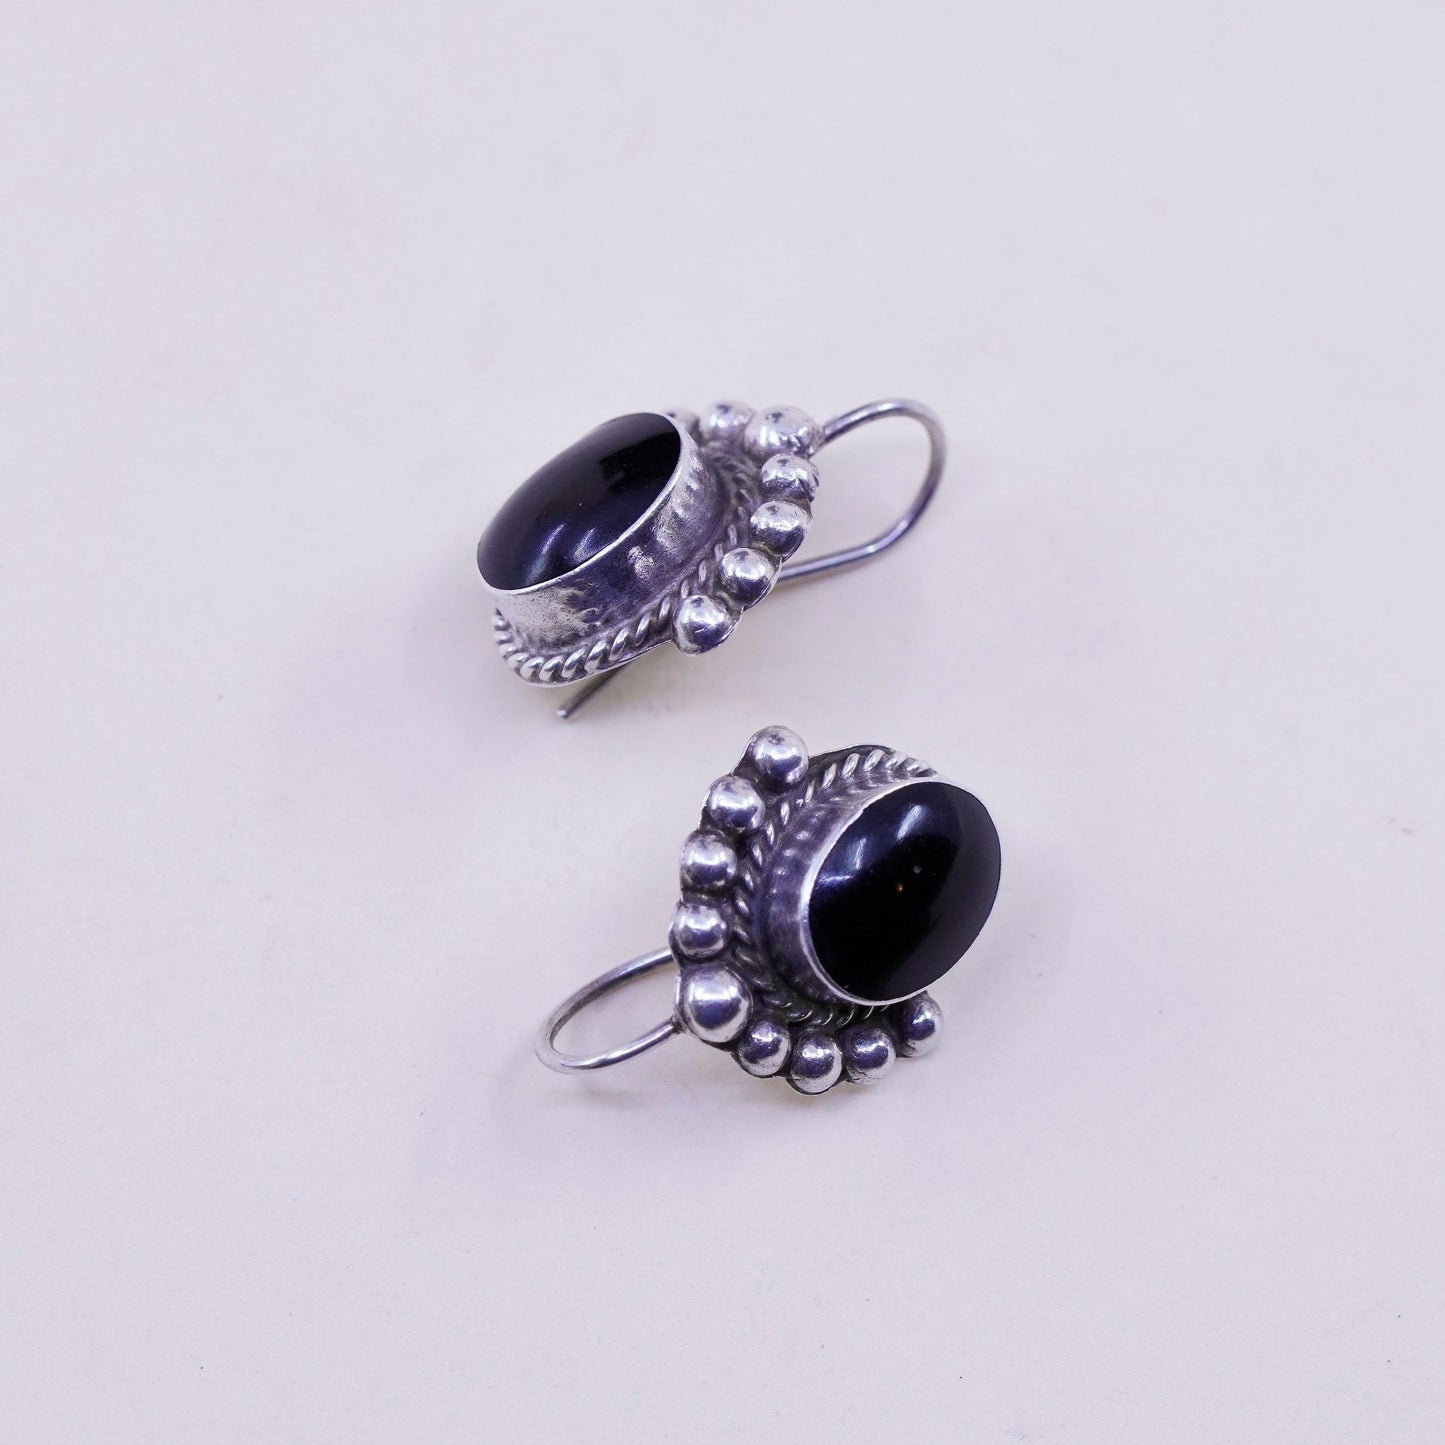 Vintage Sterling 925 silver handmade earrings with oval obsidian drops